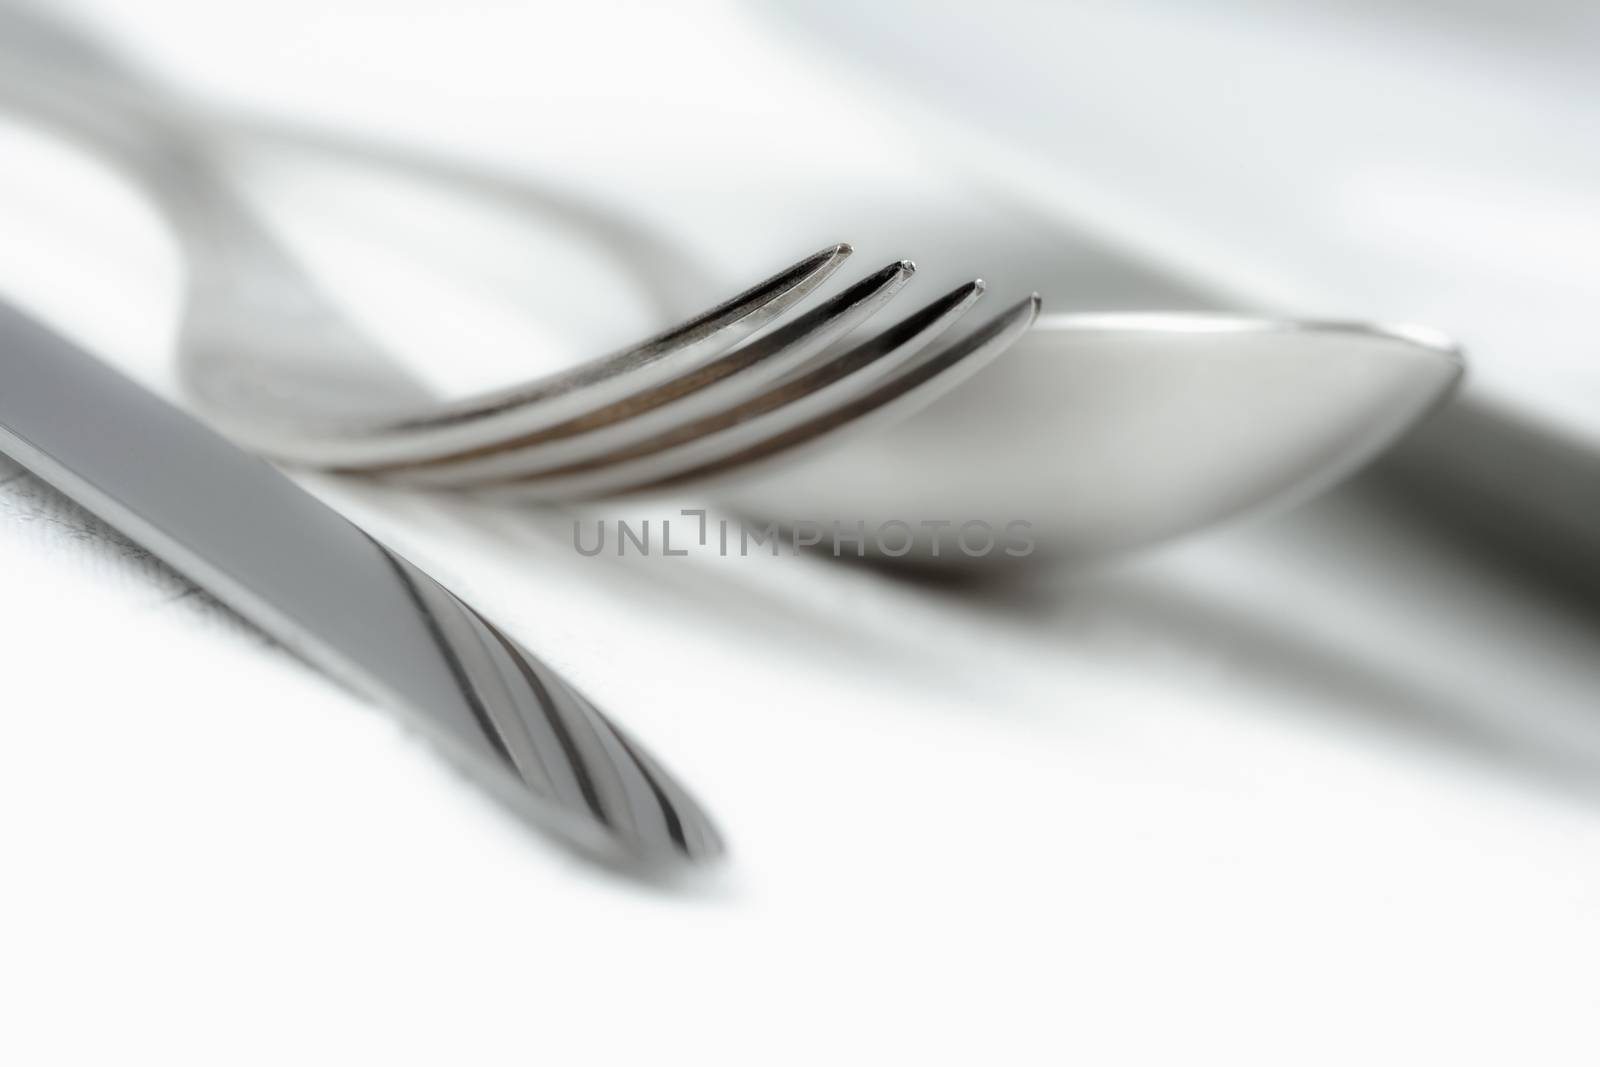 elegant table setting with silverware on white cloth